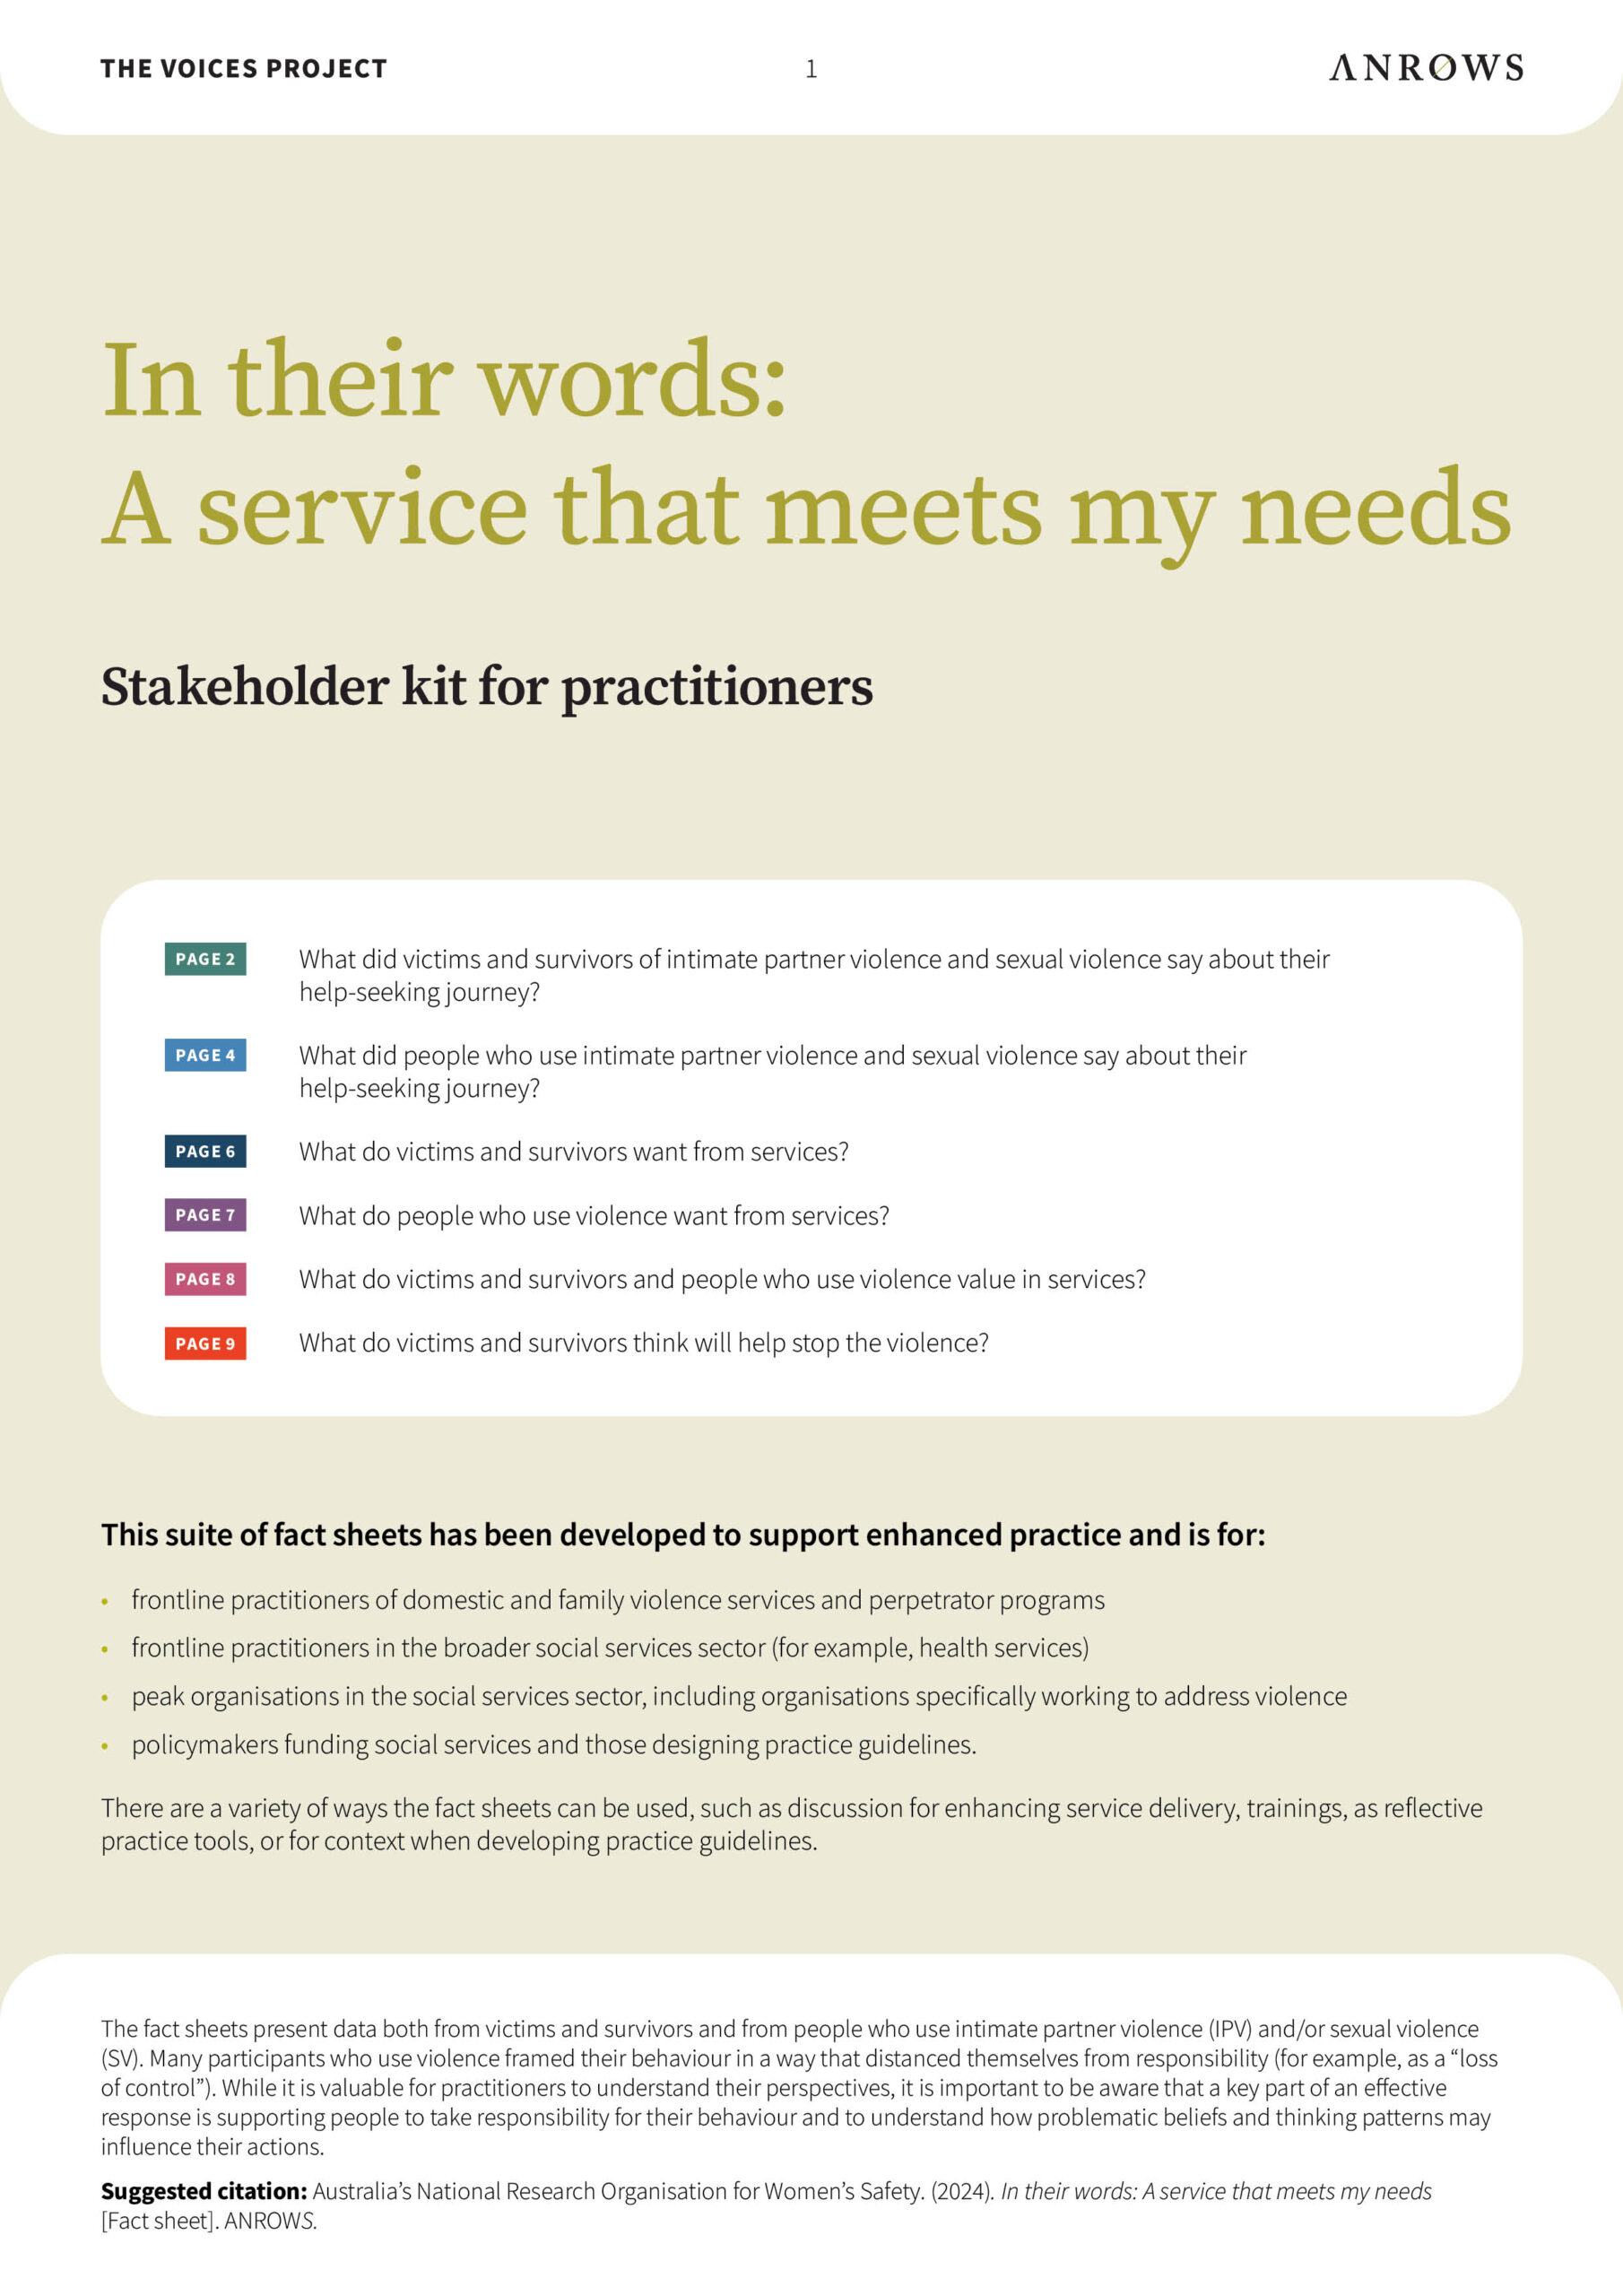 Cover page to a resource for practitioners translating findings from a research project